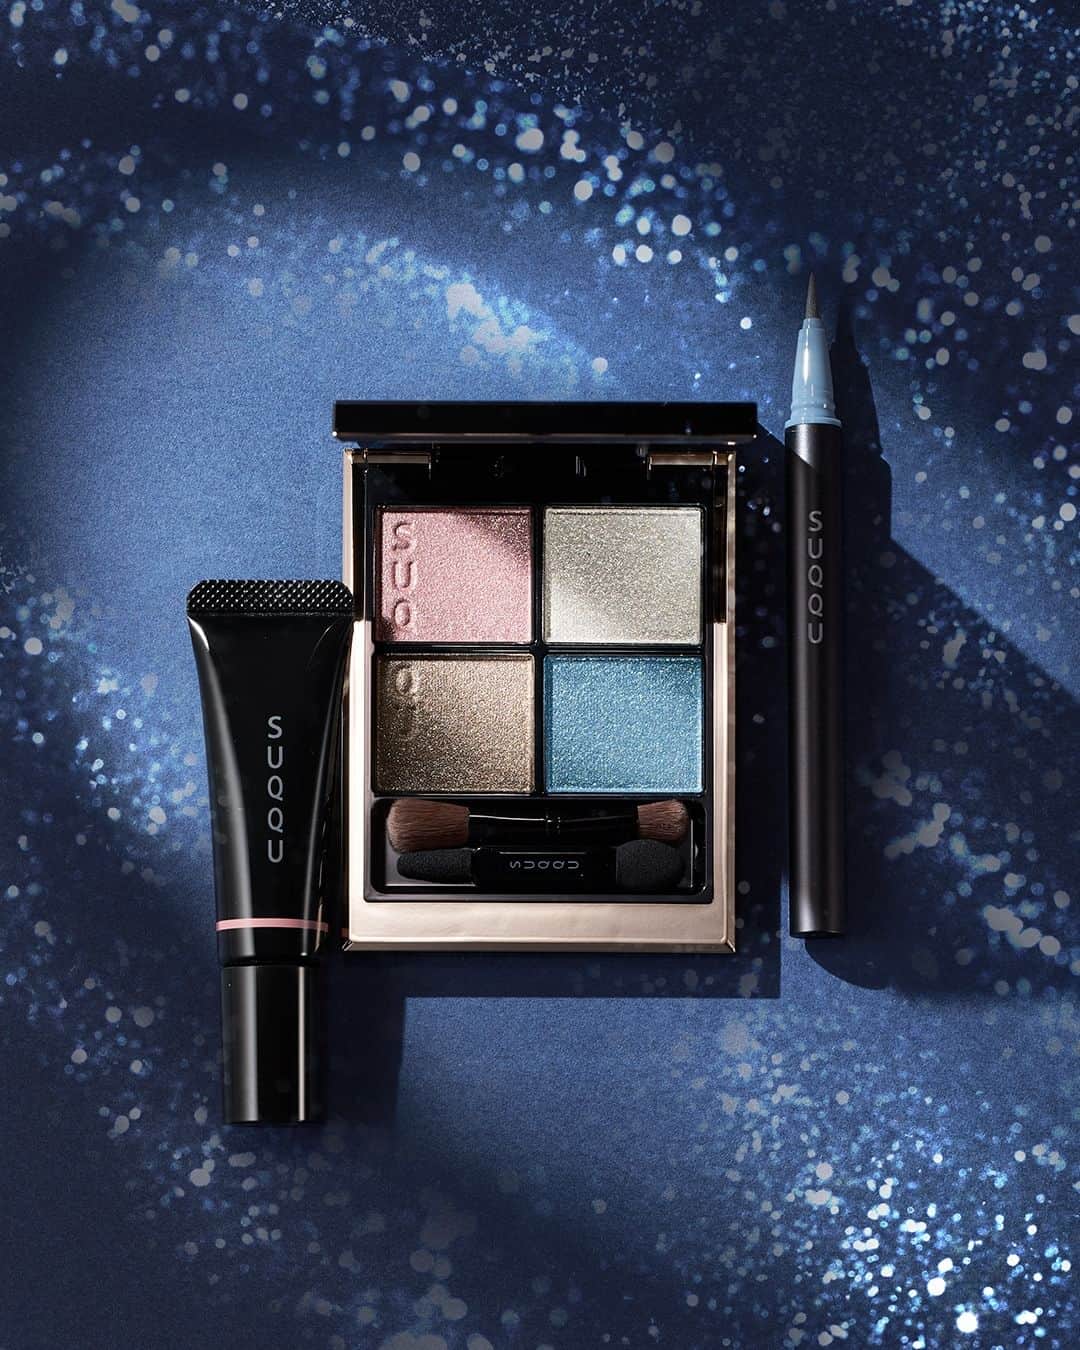 SUQQU公式Instgramアカウントのインスタグラム：「This palette is inspired by the image of shimmering silver flowers fluttering with serenity. Sharp gray and light silver give a noble and cool impression, while pink adds warmth and blue, a vivid brightness.  MAKEUP KIT RIKKA ・SIGNATURE COLOR EYES 131 RIKKA ・NUANCE EYELINER 110 Ice Gray ・DEWY LIQUID BLUSH 101 HANAIROHONOKA *Limited quantity  静寂とともに舞う、煌めく銀花をイメージしたパレット。 シャープなグレーと軽やかなシルバーで凛とした冷たさを感じさせながら、ピンクで温かみを、ブルーで鮮やかな明るさをプラスします。  メイクアップ キット 六花 ・シグニチャー カラー アイズ 131 六花 -RIKKA ・ニュアンス アイライナー 110 アイスグレー ・デューイー リクイド ブラッシュ 101 花彩洸 -HANAIROHONOKA ※数量限定  #SUQQU #スック #jbeauty #cosmetics #SUQQU20th #SUQQUcolormakeup #holiday #holidaycollection #銀世界 #newcollection #newproducts #limited #六花」